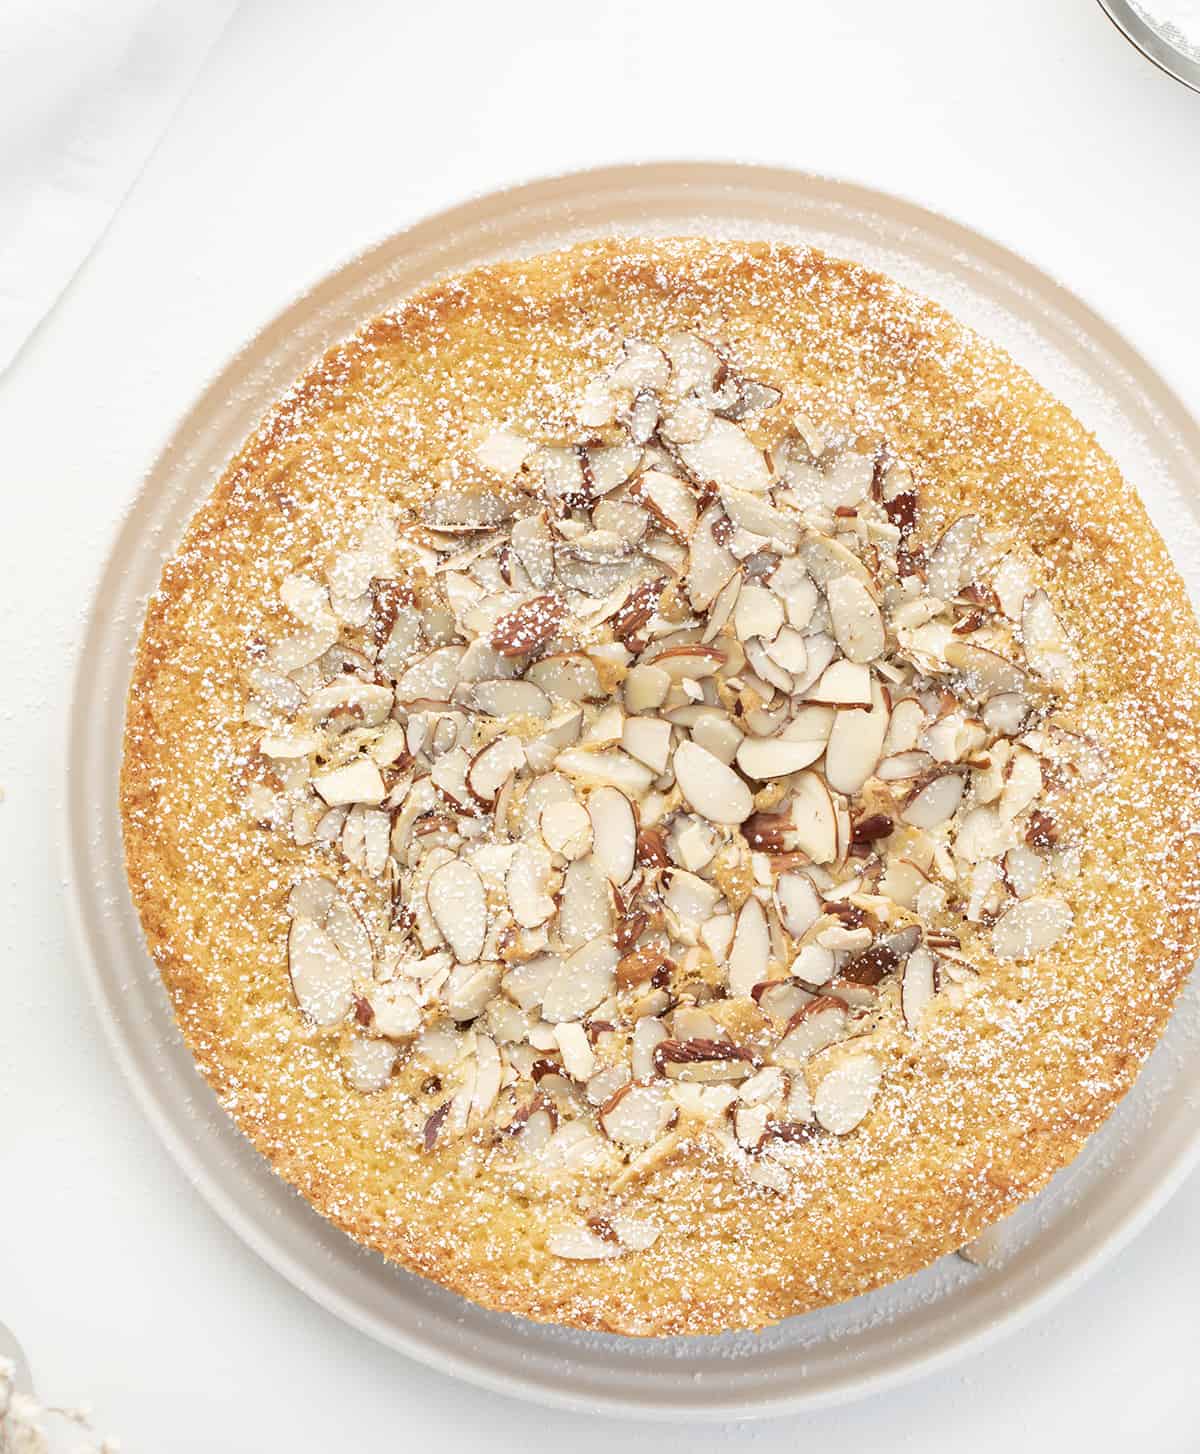 Whole Almond Cake on White Plate Sprinkled with Confectioners Sugar. Almond Cake, French Almond Cake, Moist Almond Cake, How to Make Almond Cake, Almond Cake Recipes, Easy Almond Cake Recipes, Baking, Dessert, Holiday Baking, Christmas Cake, Thanksgiving Cake, i am baker, iambaker